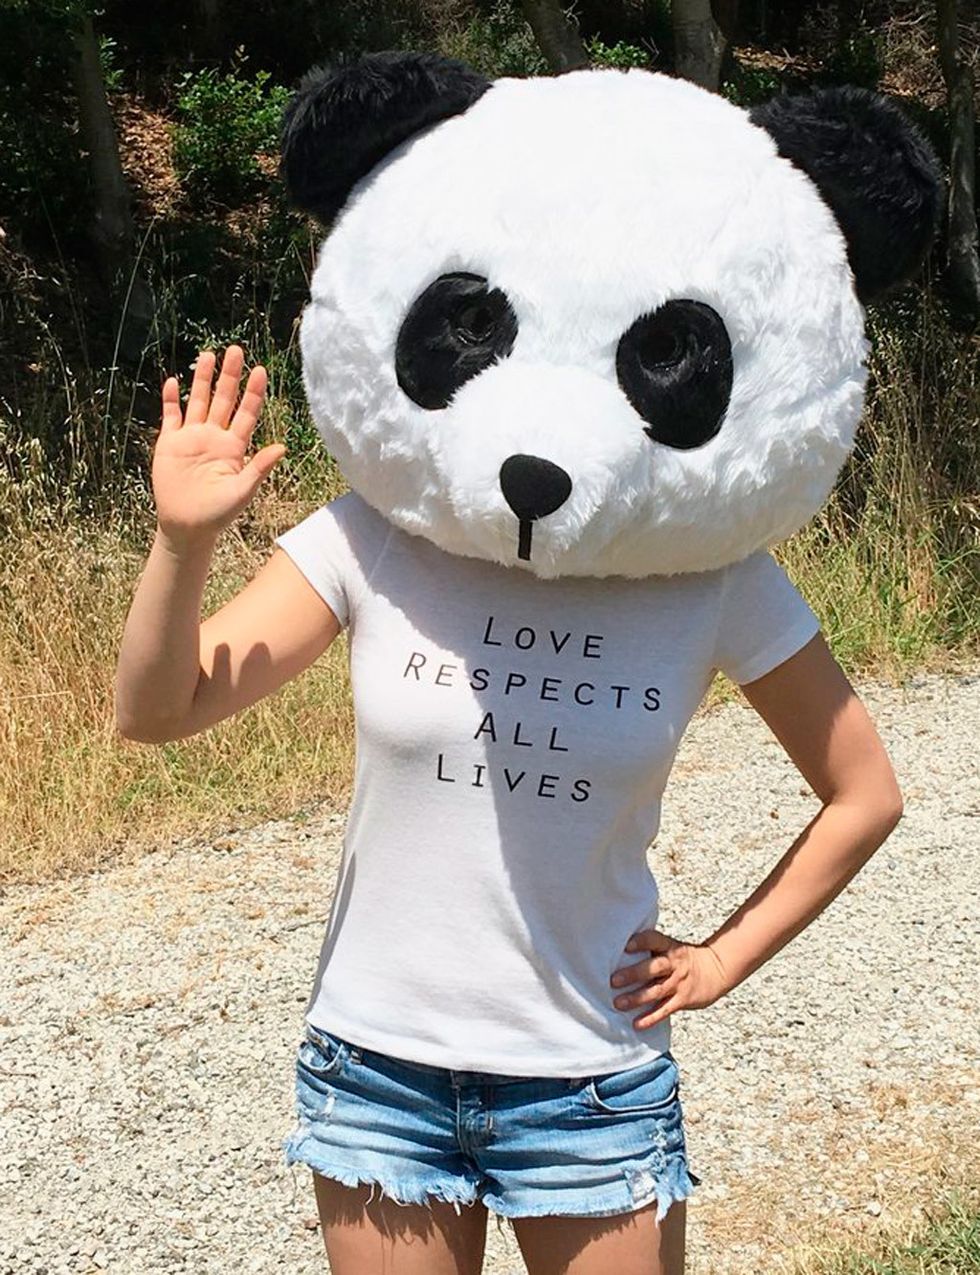 <p>Si eres vegana puedes mostrar el amor y el respeto a todos los animales del planeta con esta camiseta de <a href="https://www.meaningfulpaws.care/collections/tees/products/love-respects-all-lives-womens-tee?variant=20215141377" target="_blank">Meaningful Paws</a>&nbsp;(27,19 €).</p>